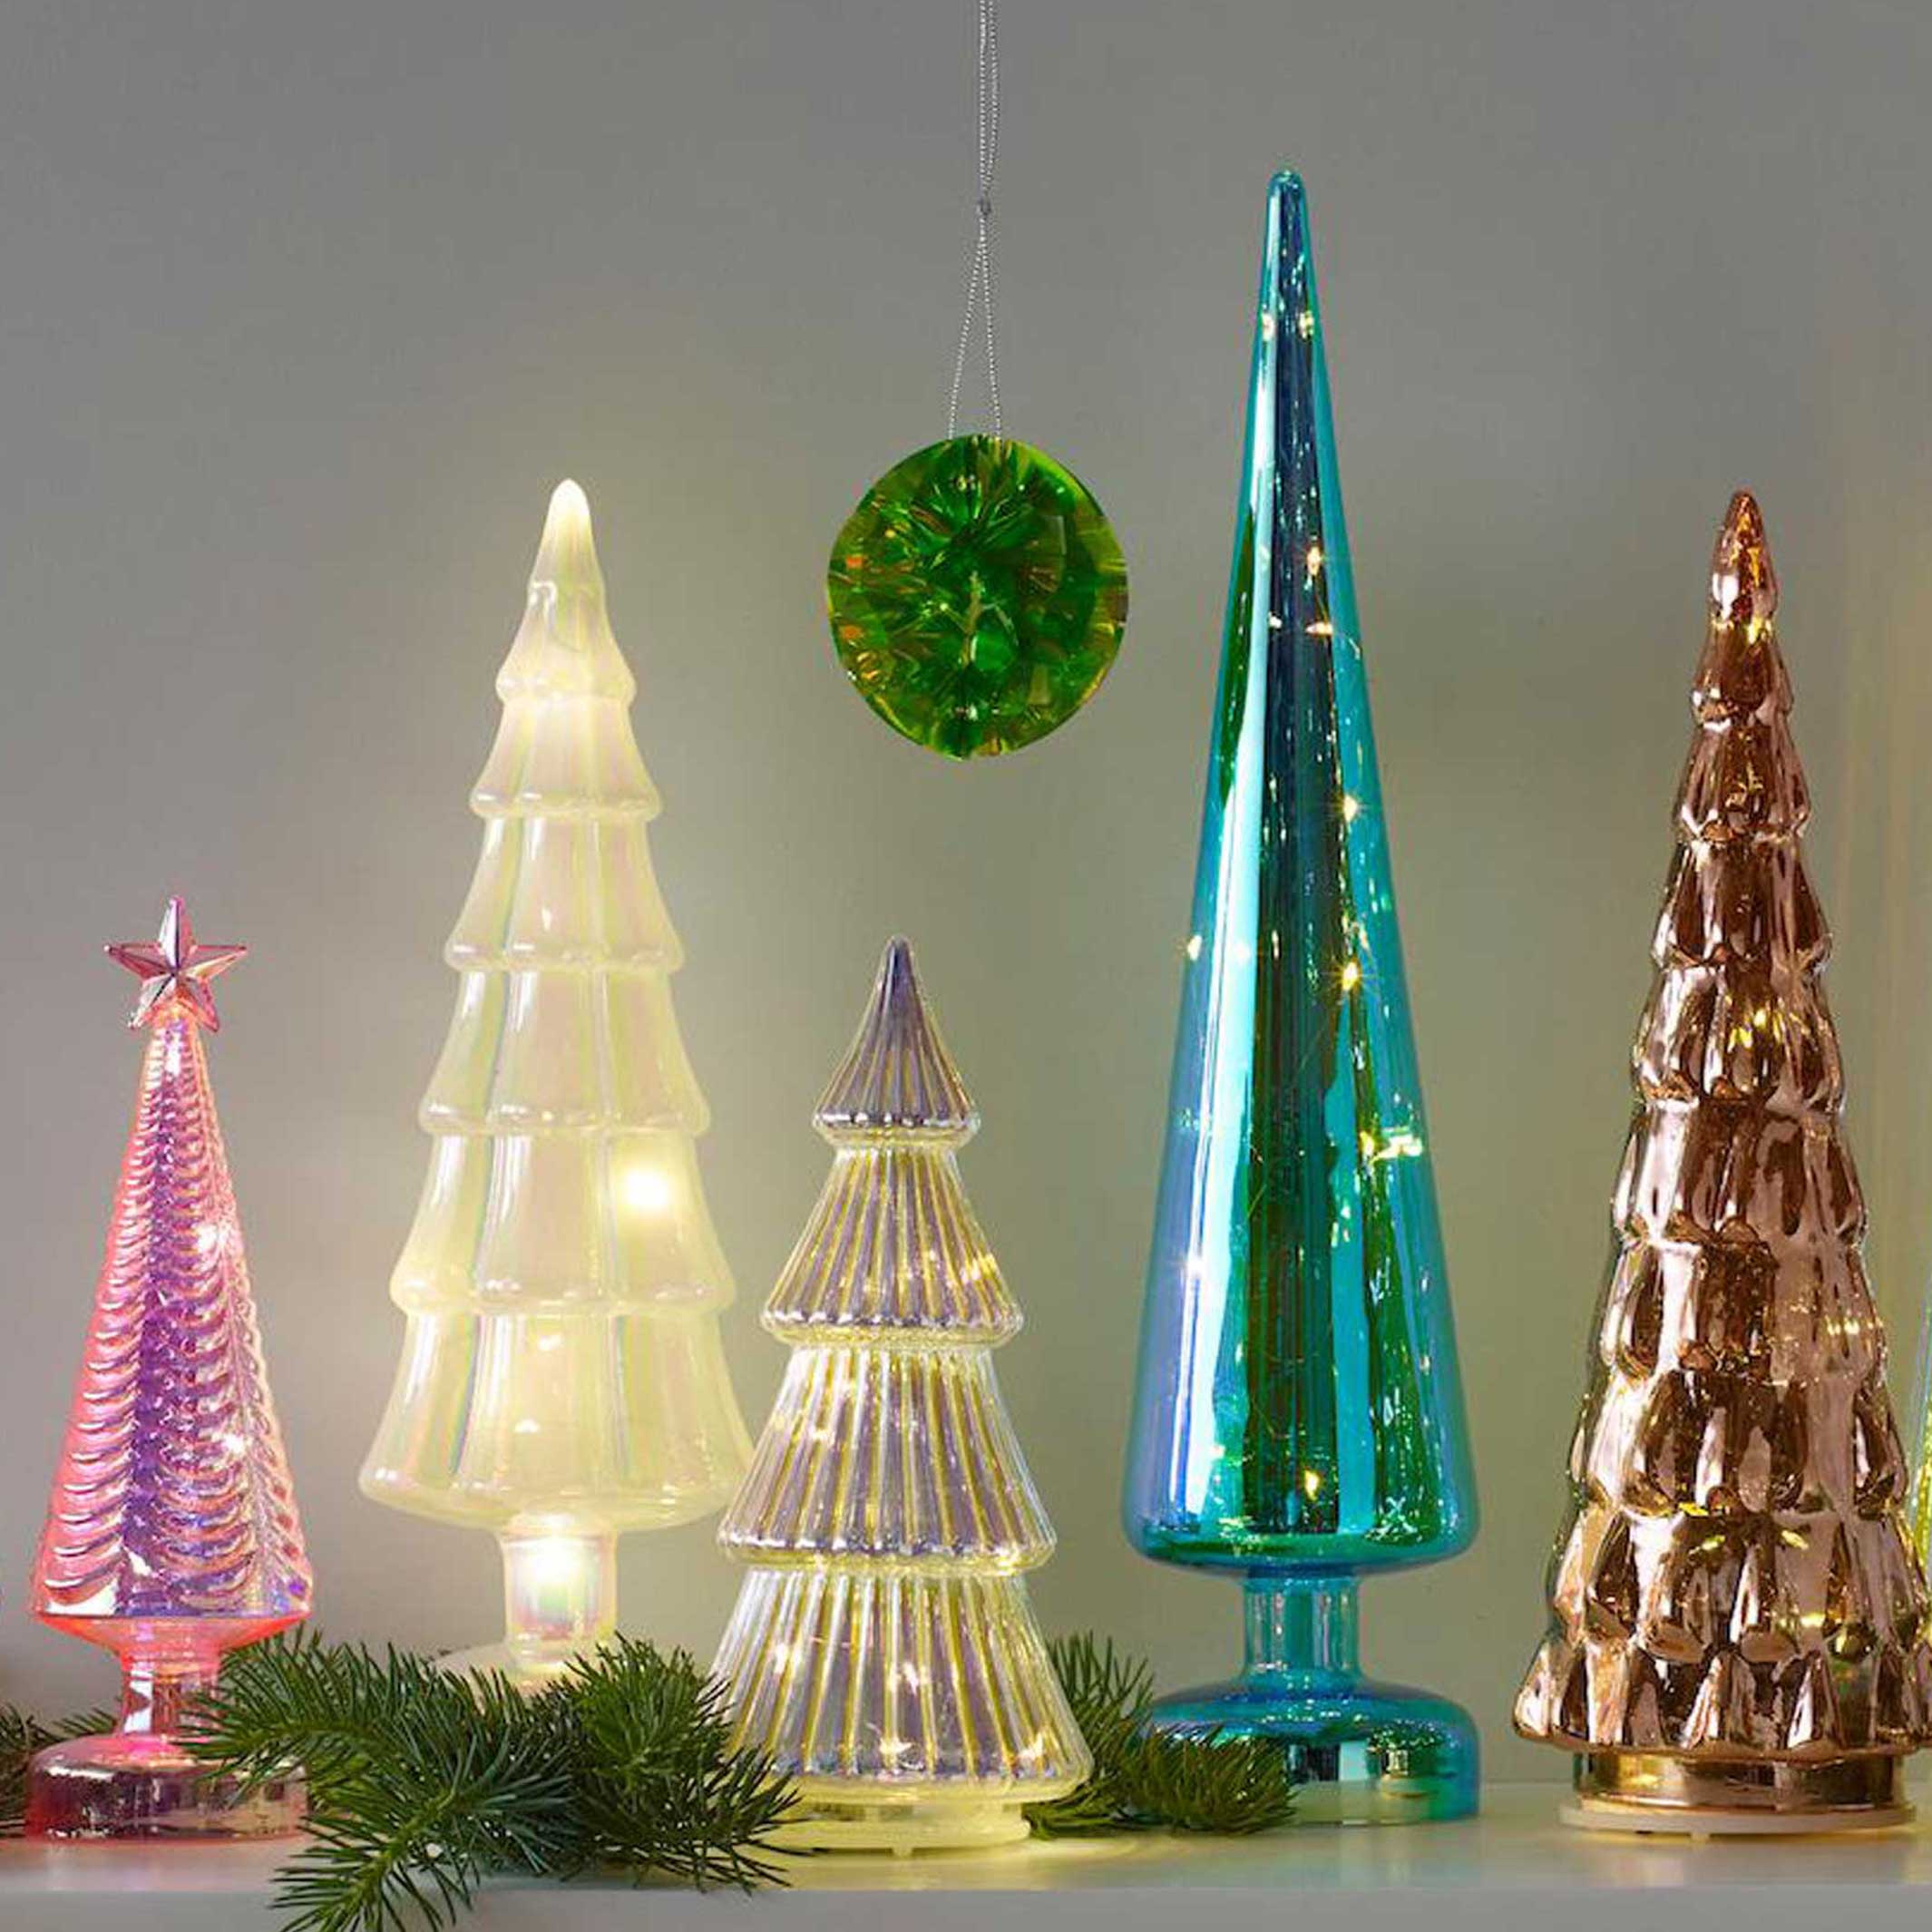 mit | große GLASS LED LIGHTED LE TREES Colorful Large Glas-TANNENBÄUME